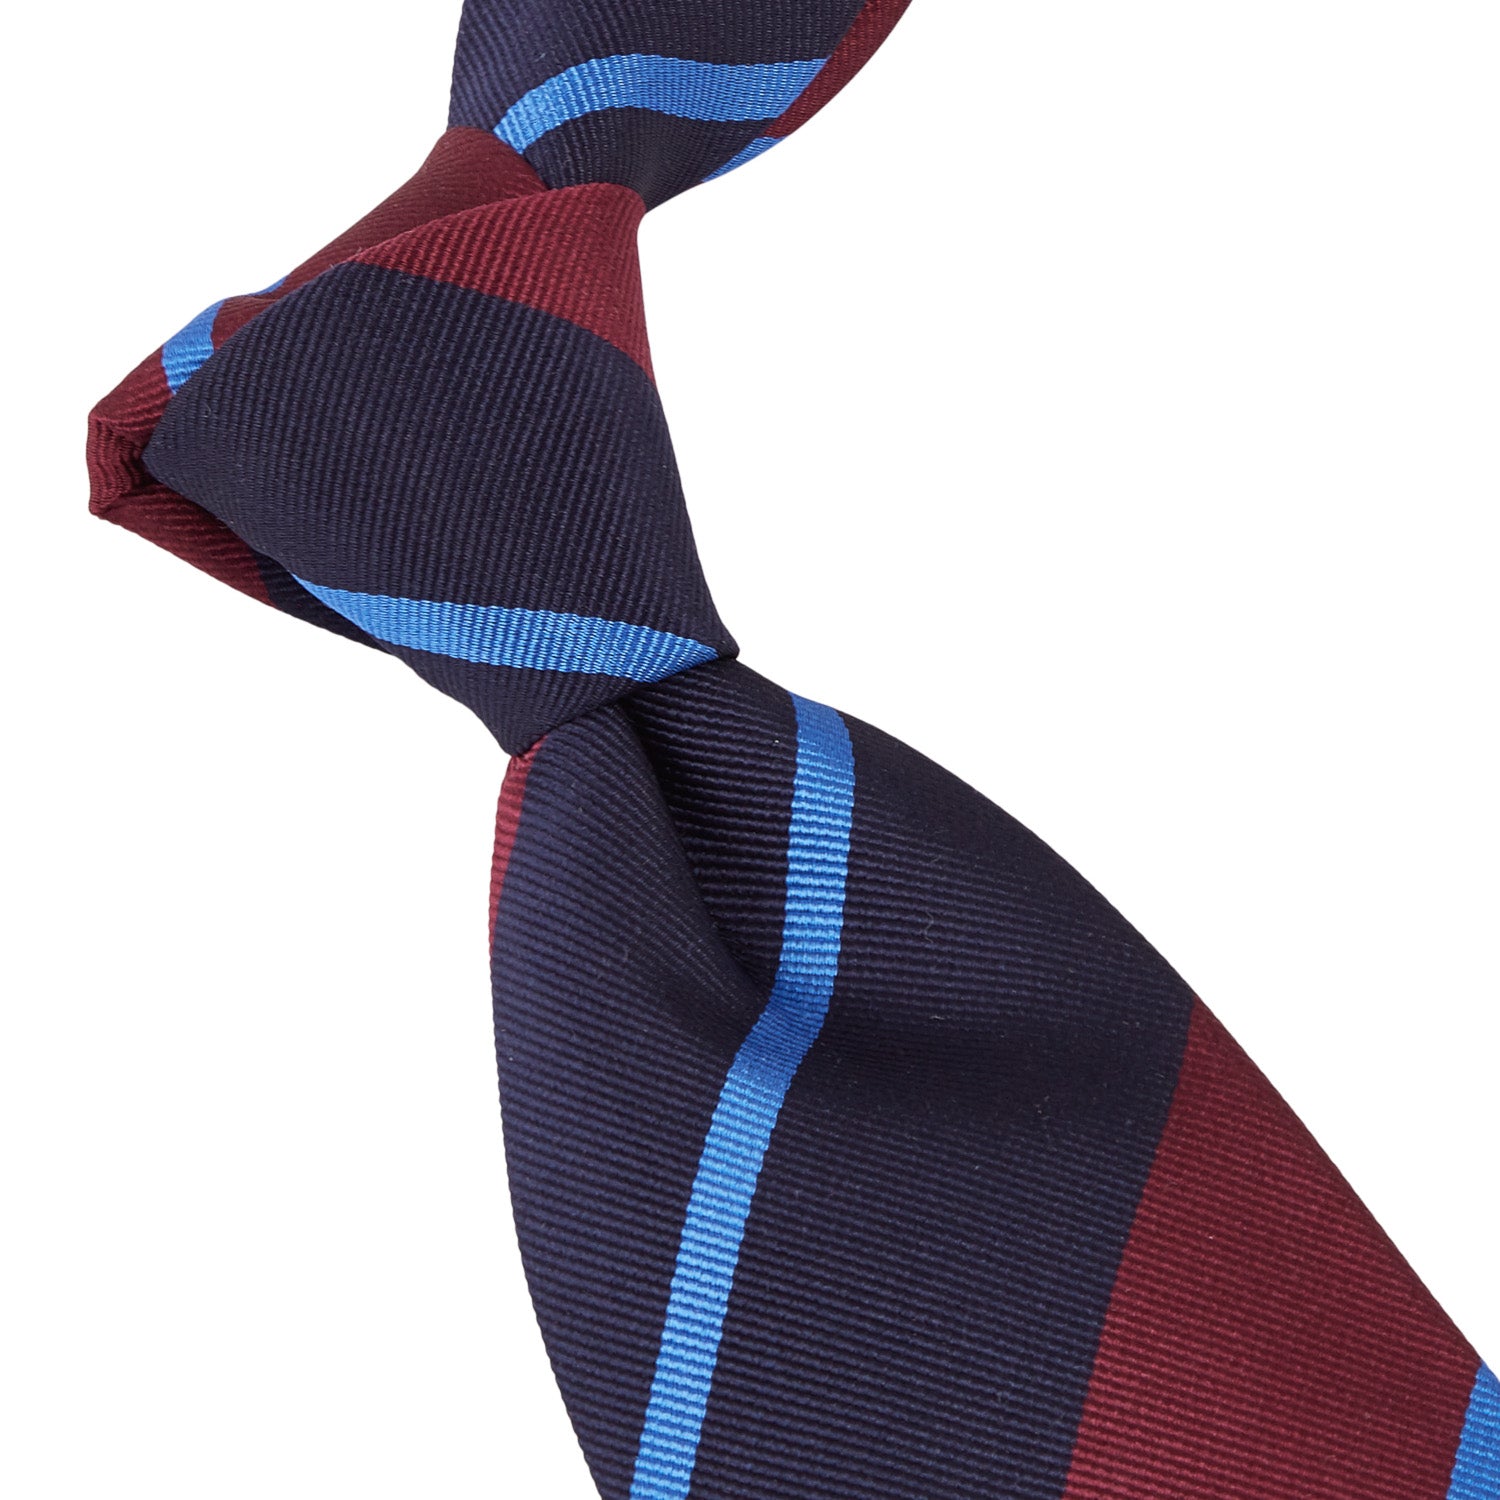 A Sovereign Grade Navy/Burgundy Rep Tie on a white background, handmade in the United Kingdom by KirbyAllison.com.